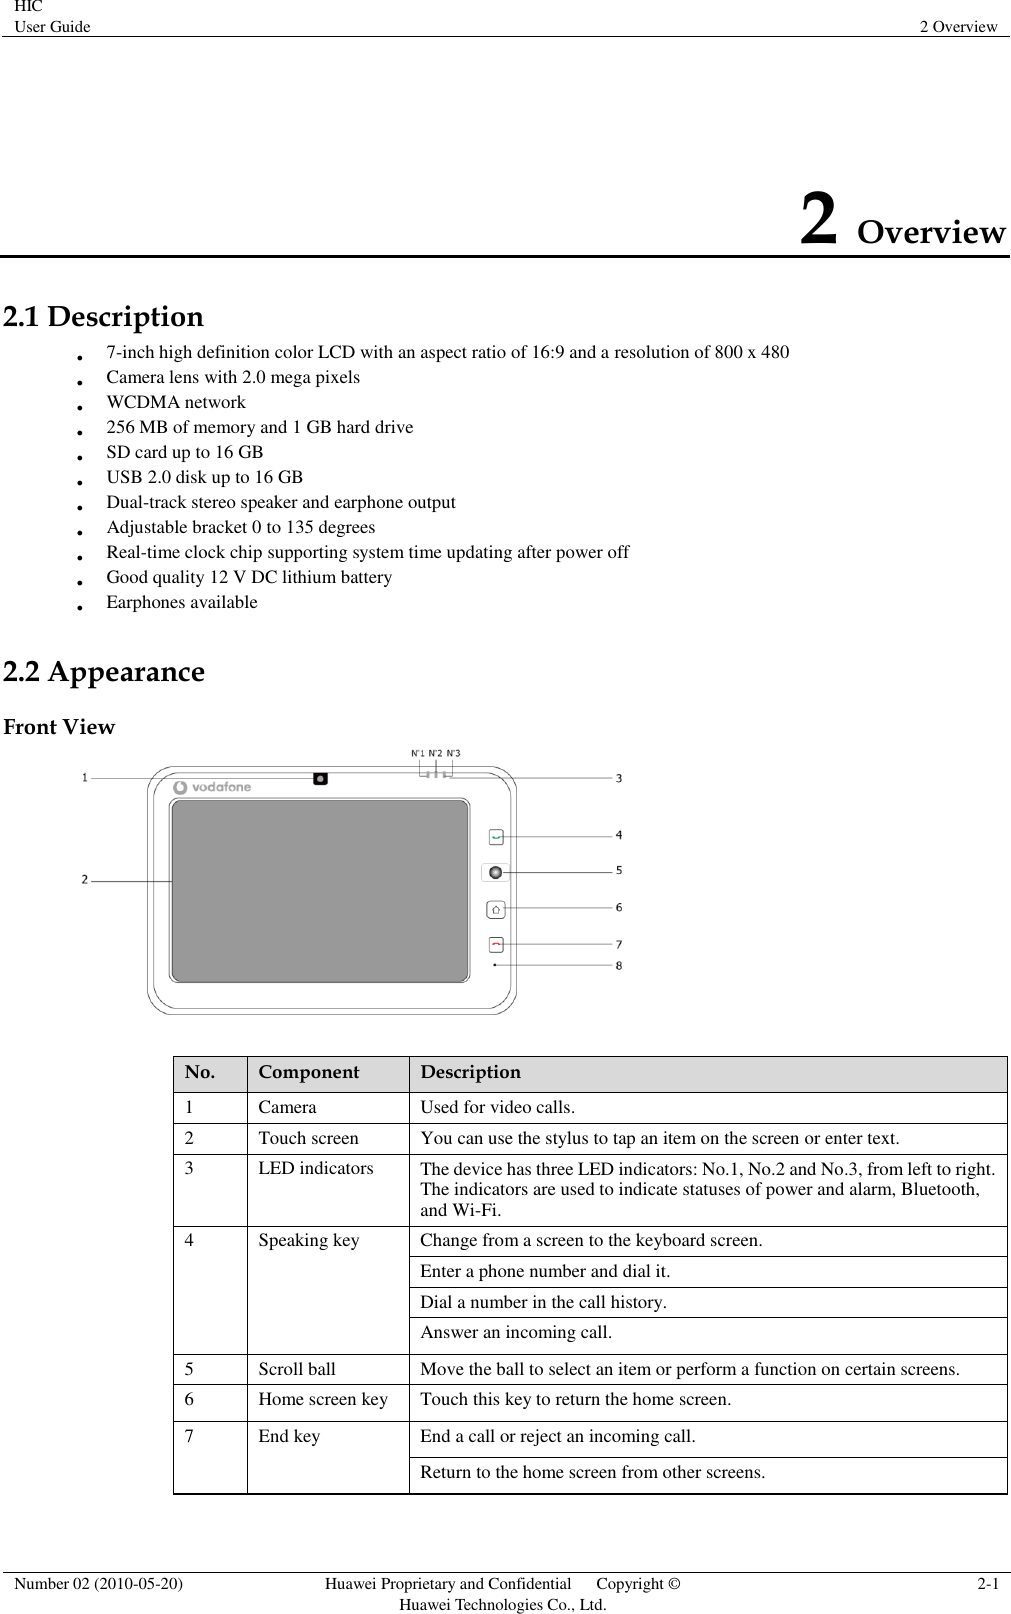 HIC User Guide 2 Overview  Number 02 (2010-05-20) Huawei Proprietary and Confidential      Copyright © Huawei Technologies Co., Ltd. 2-1  2 Overview 2.1 Description  7-inch high definition color LCD with an aspect ratio of 16:9 and a resolution of 800 x 480  Camera lens with 2.0 mega pixels  WCDMA network  256 MB of memory and 1 GB hard drive  SD card up to 16 GB  USB 2.0 disk up to 16 GB  Dual-track stereo speaker and earphone output  Adjustable bracket 0 to 135 degrees  Real-time clock chip supporting system time updating after power off  Good quality 12 V DC lithium battery  Earphones available 2.2 Appearance Front View    No. Component Description 1 Camera Used for video calls. 2 Touch screen You can use the stylus to tap an item on the screen or enter text. 3 LED indicators The device has three LED indicators: No.1, No.2 and No.3, from left to right. The indicators are used to indicate statuses of power and alarm, Bluetooth, and Wi-Fi.  4 Speaking key Change from a screen to the keyboard screen. Enter a phone number and dial it. Dial a number in the call history. Answer an incoming call. 5 Scroll ball  Move the ball to select an item or perform a function on certain screens. 6 Home screen key Touch this key to return the home screen. 7 End key End a call or reject an incoming call. Return to the home screen from other screens. 